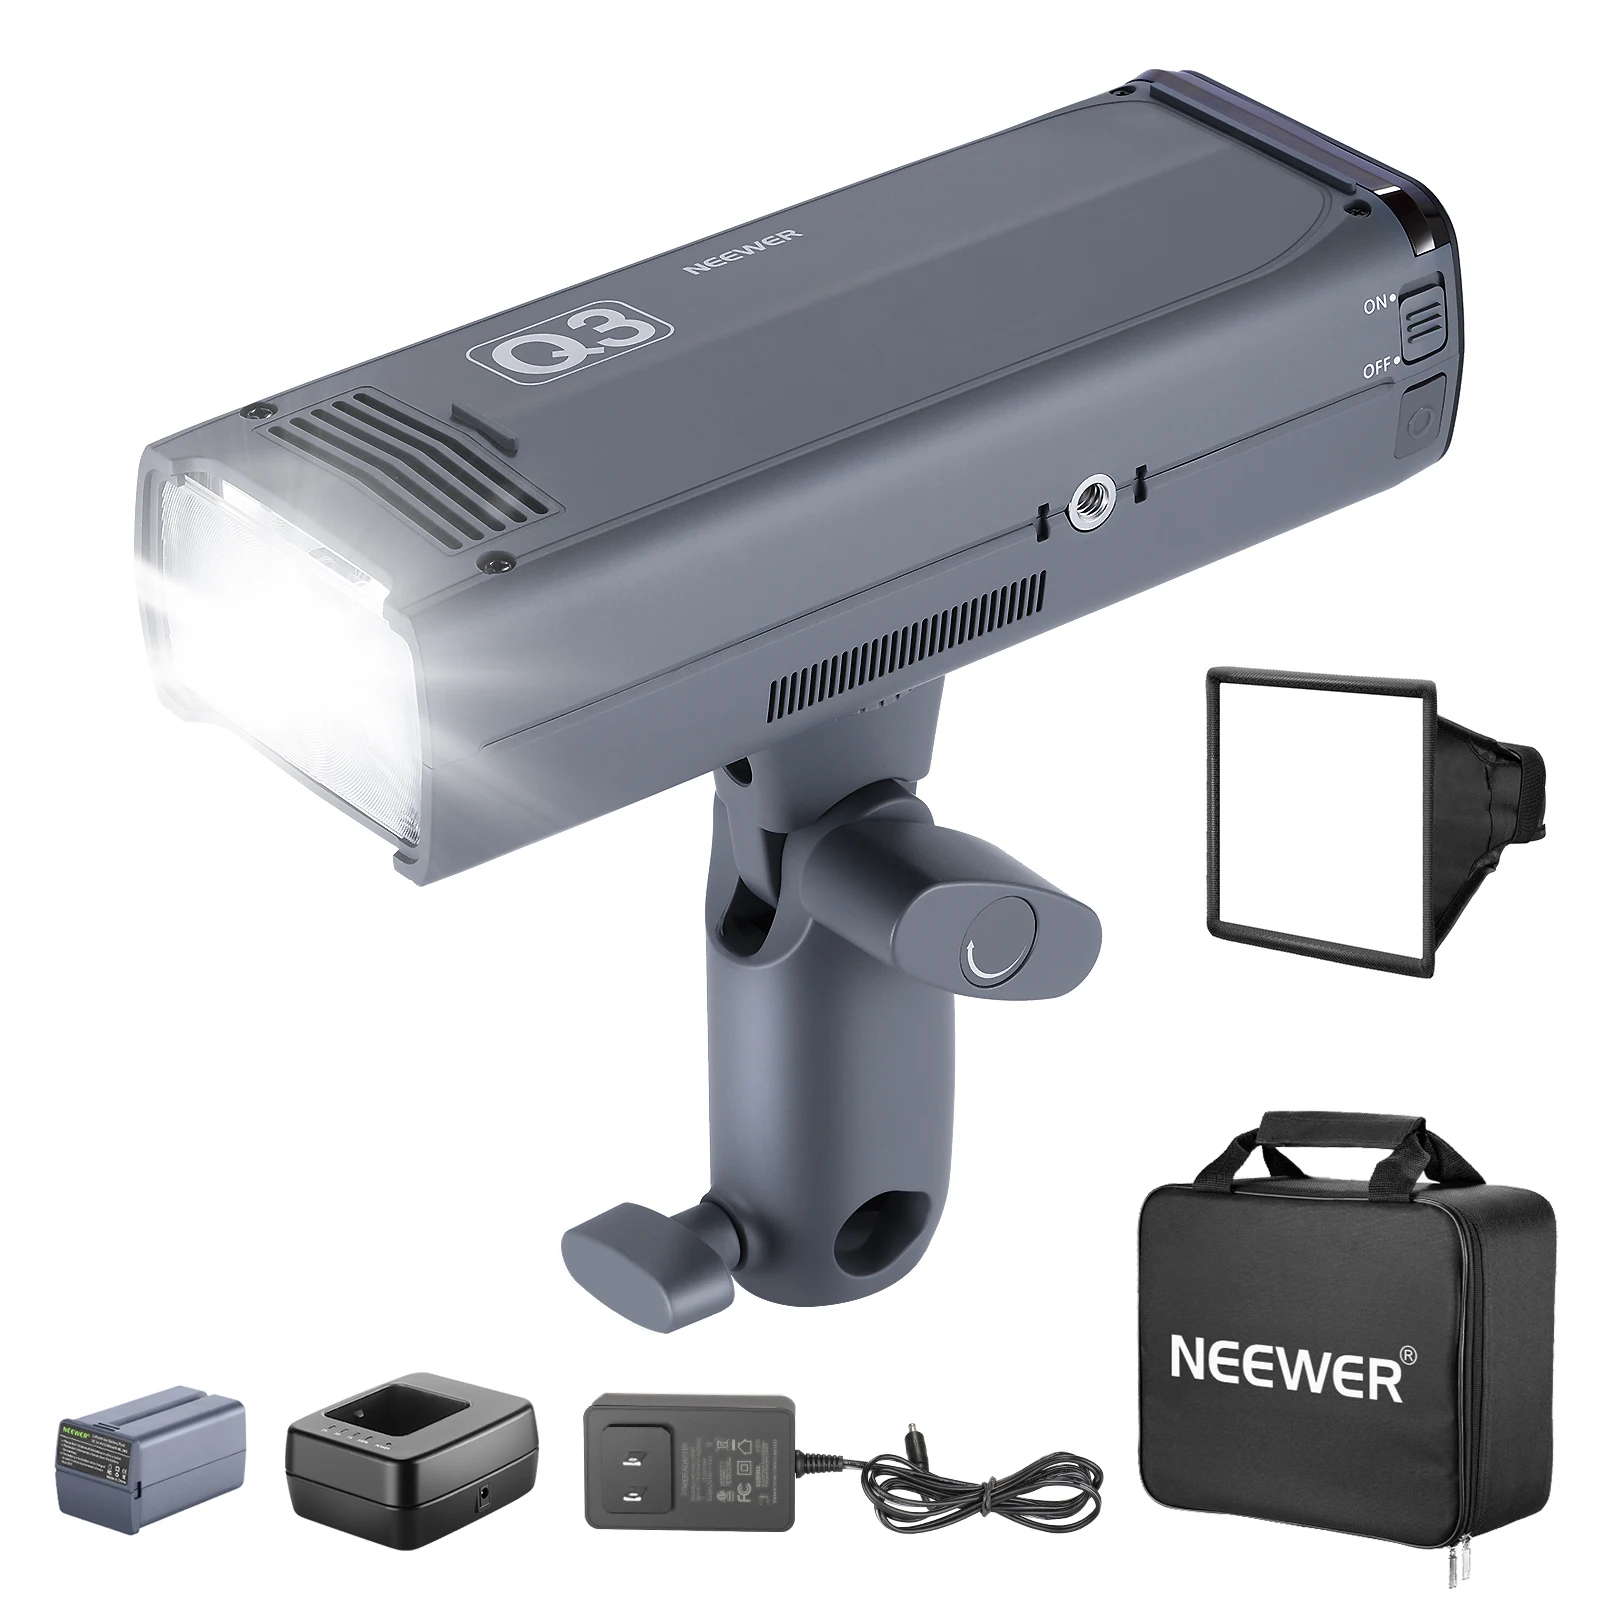 

NEEWER Q3 200Ws 2.4G TTL Flash (2nd Version), 1/8000 HSS GN58 Strobe Light Portable Photography Monolight with Softbox Diffuser